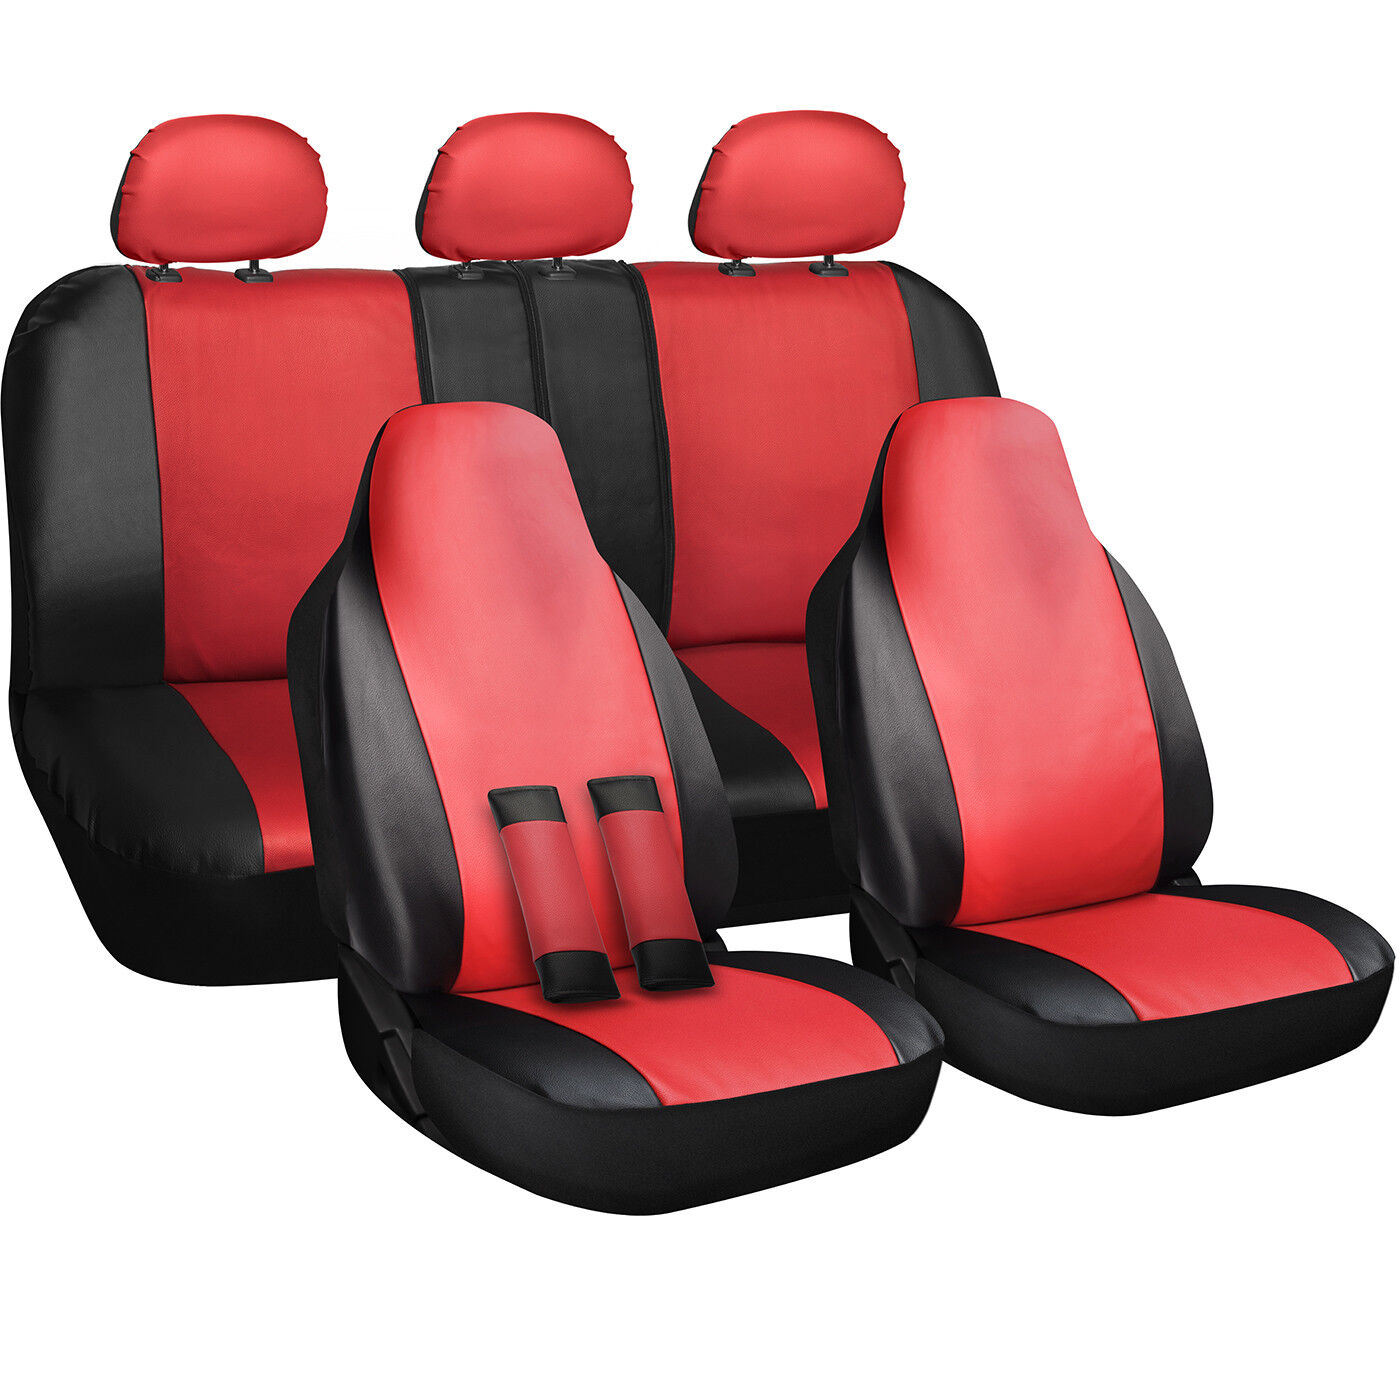 Seat Cover Complete Set for Car Truck SUV Van - PU Leather - 10 Piece